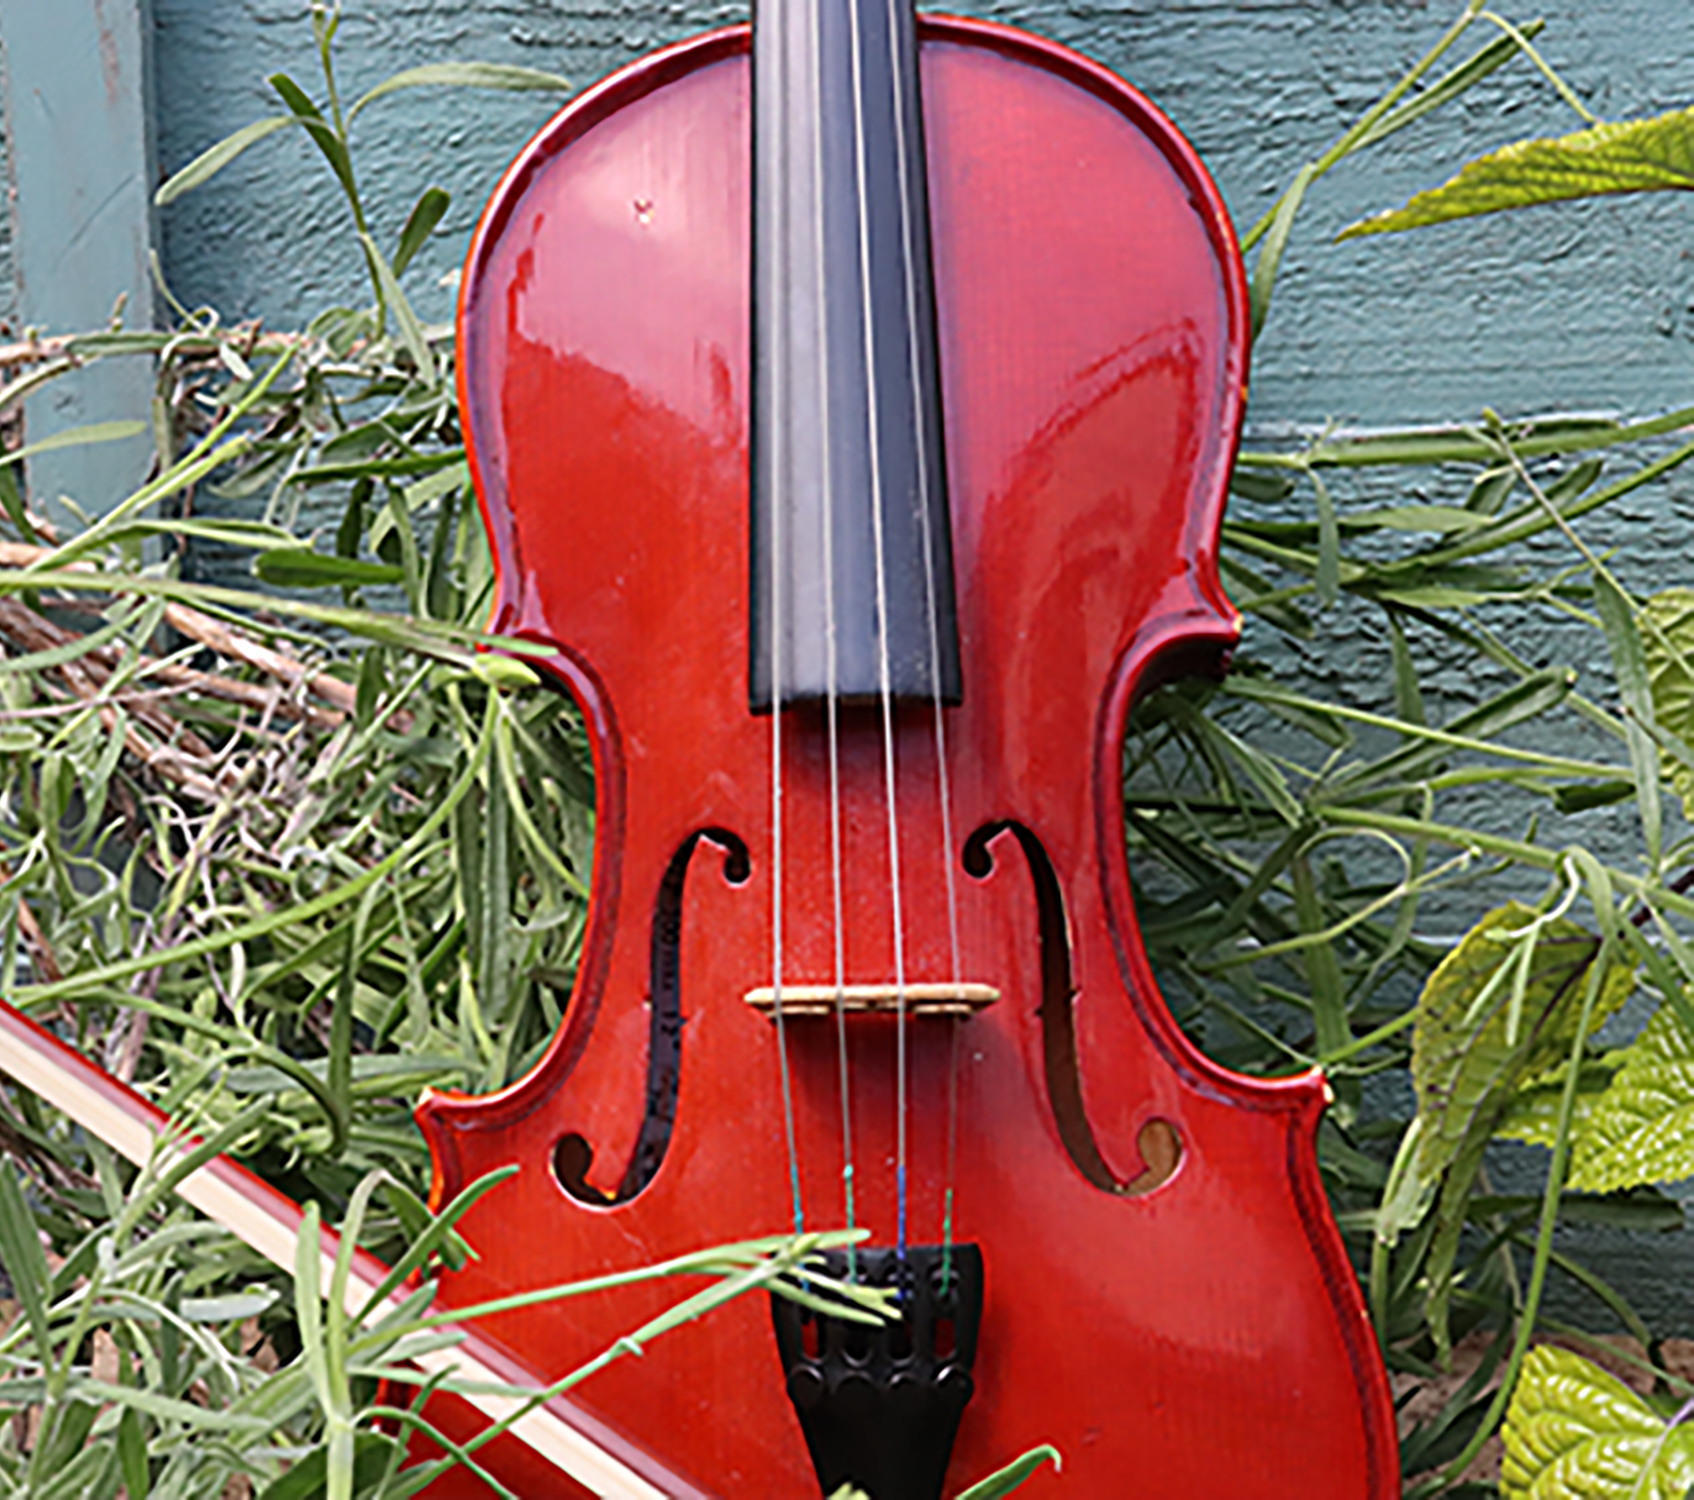 A violin stands in grass against a turquoise wall